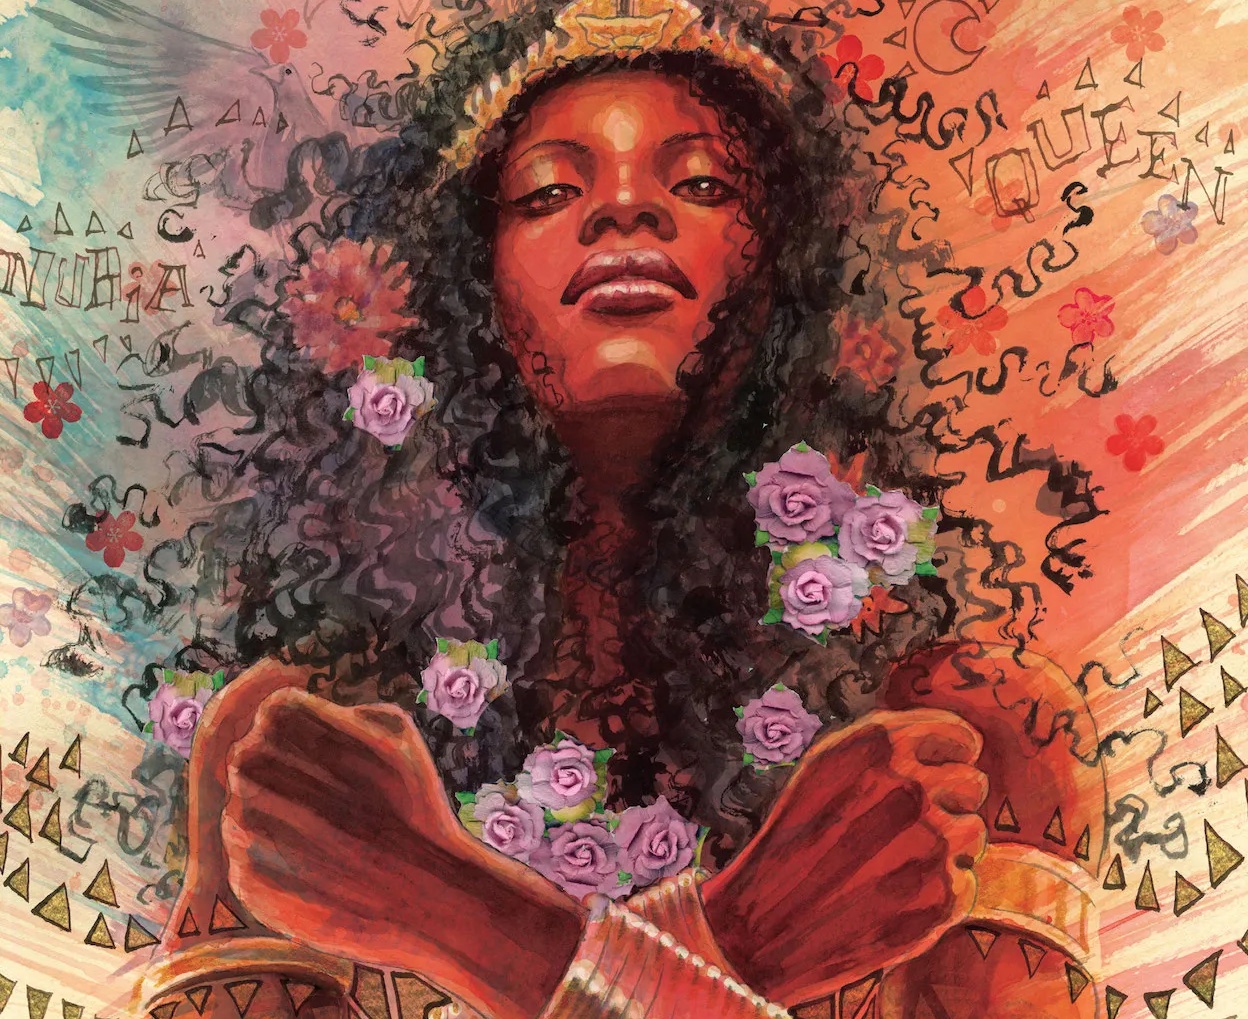 'Nubia: Coronation Special' #1 is filled with hope and contemplation